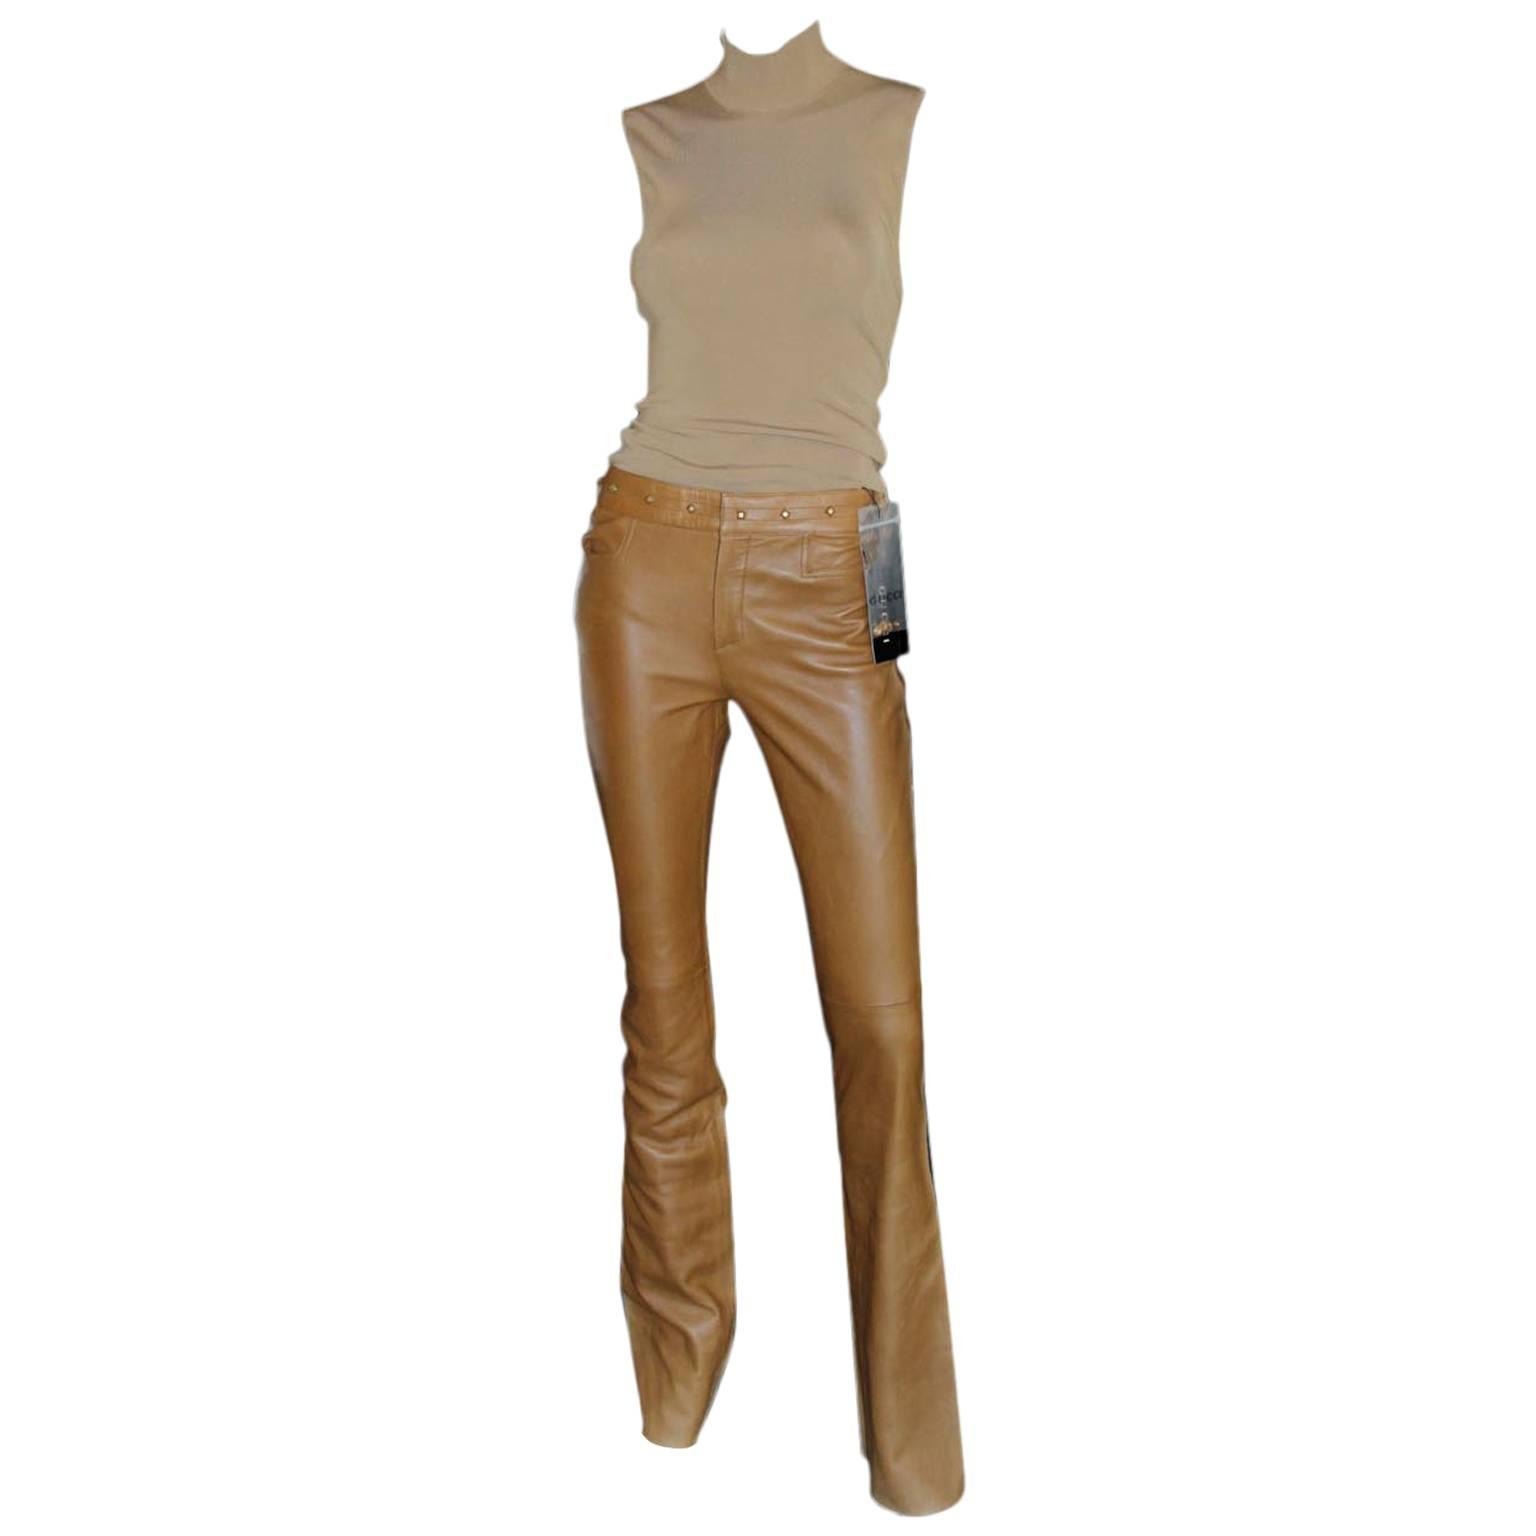 Total Dispersal! Gorgeous BNWT Tom Ford Gucci SS 2004 Leather Pants!